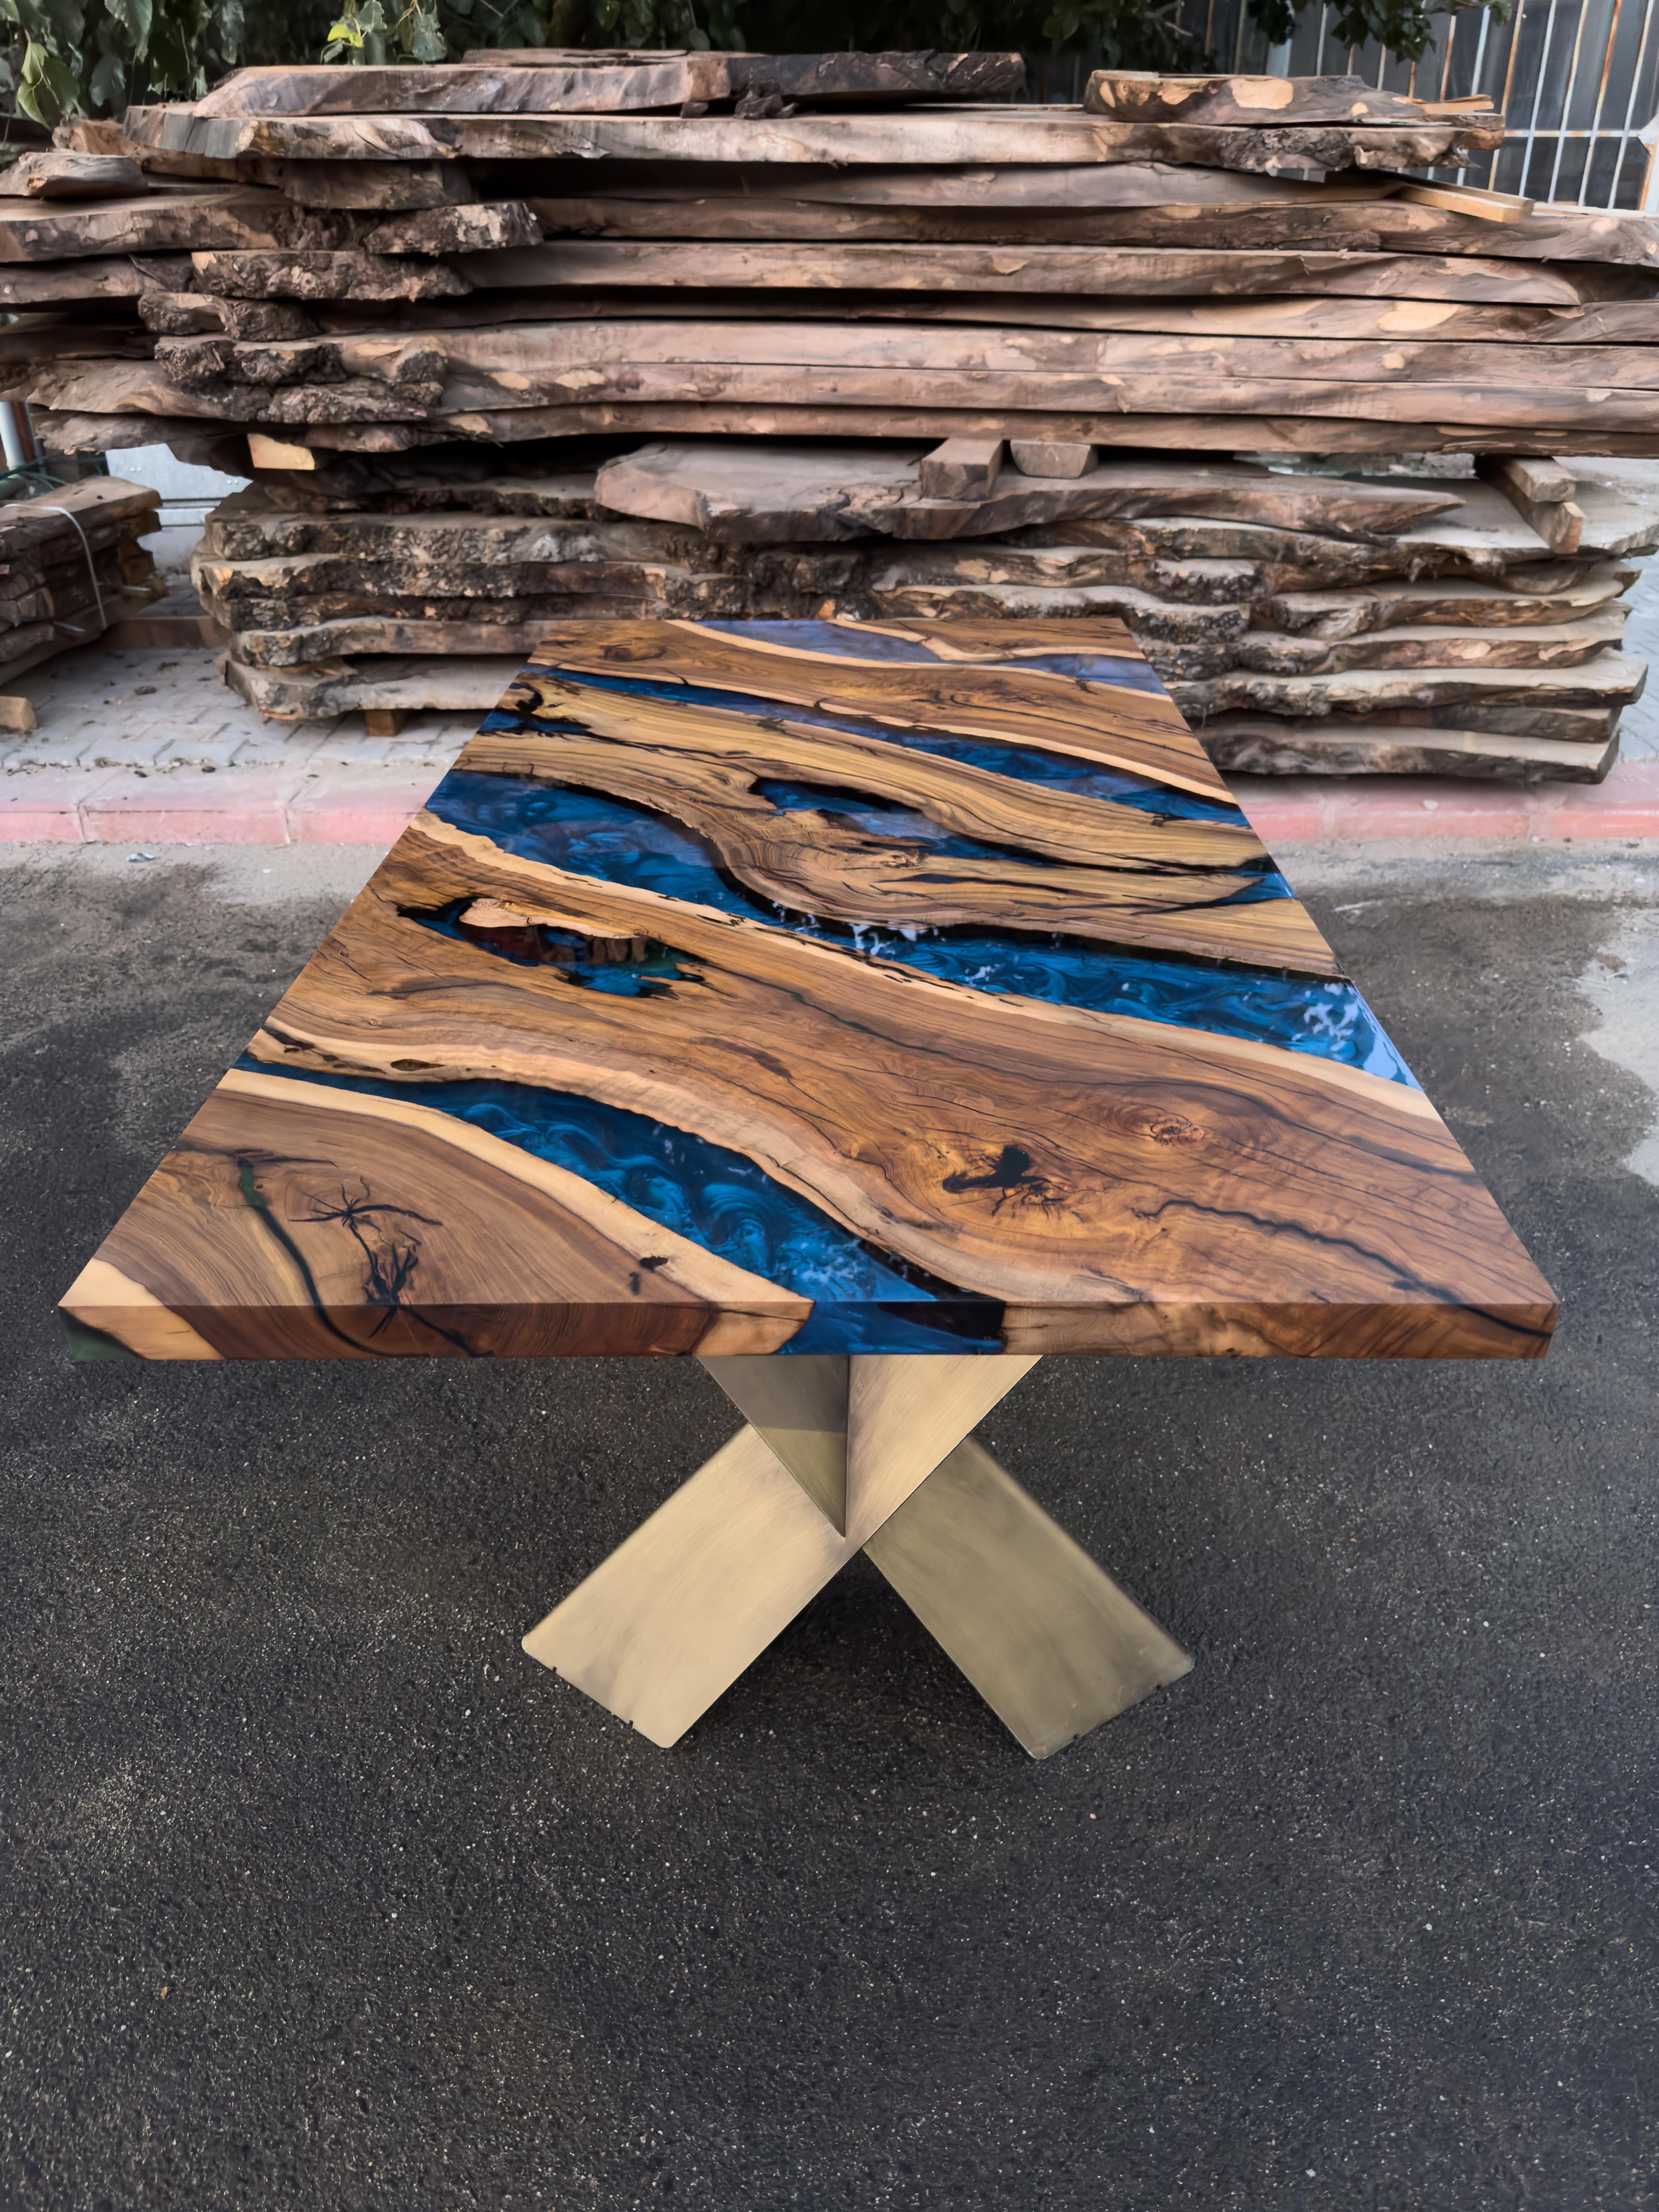 Custom Hackberry Epoxy Table

This stunning table is made of Mediterranean Hackberry wood. The unique beauty of the natural curves of olive wood combined with blue epoxy is seen in this table.

All woods have its own natural shape. Therefore, each